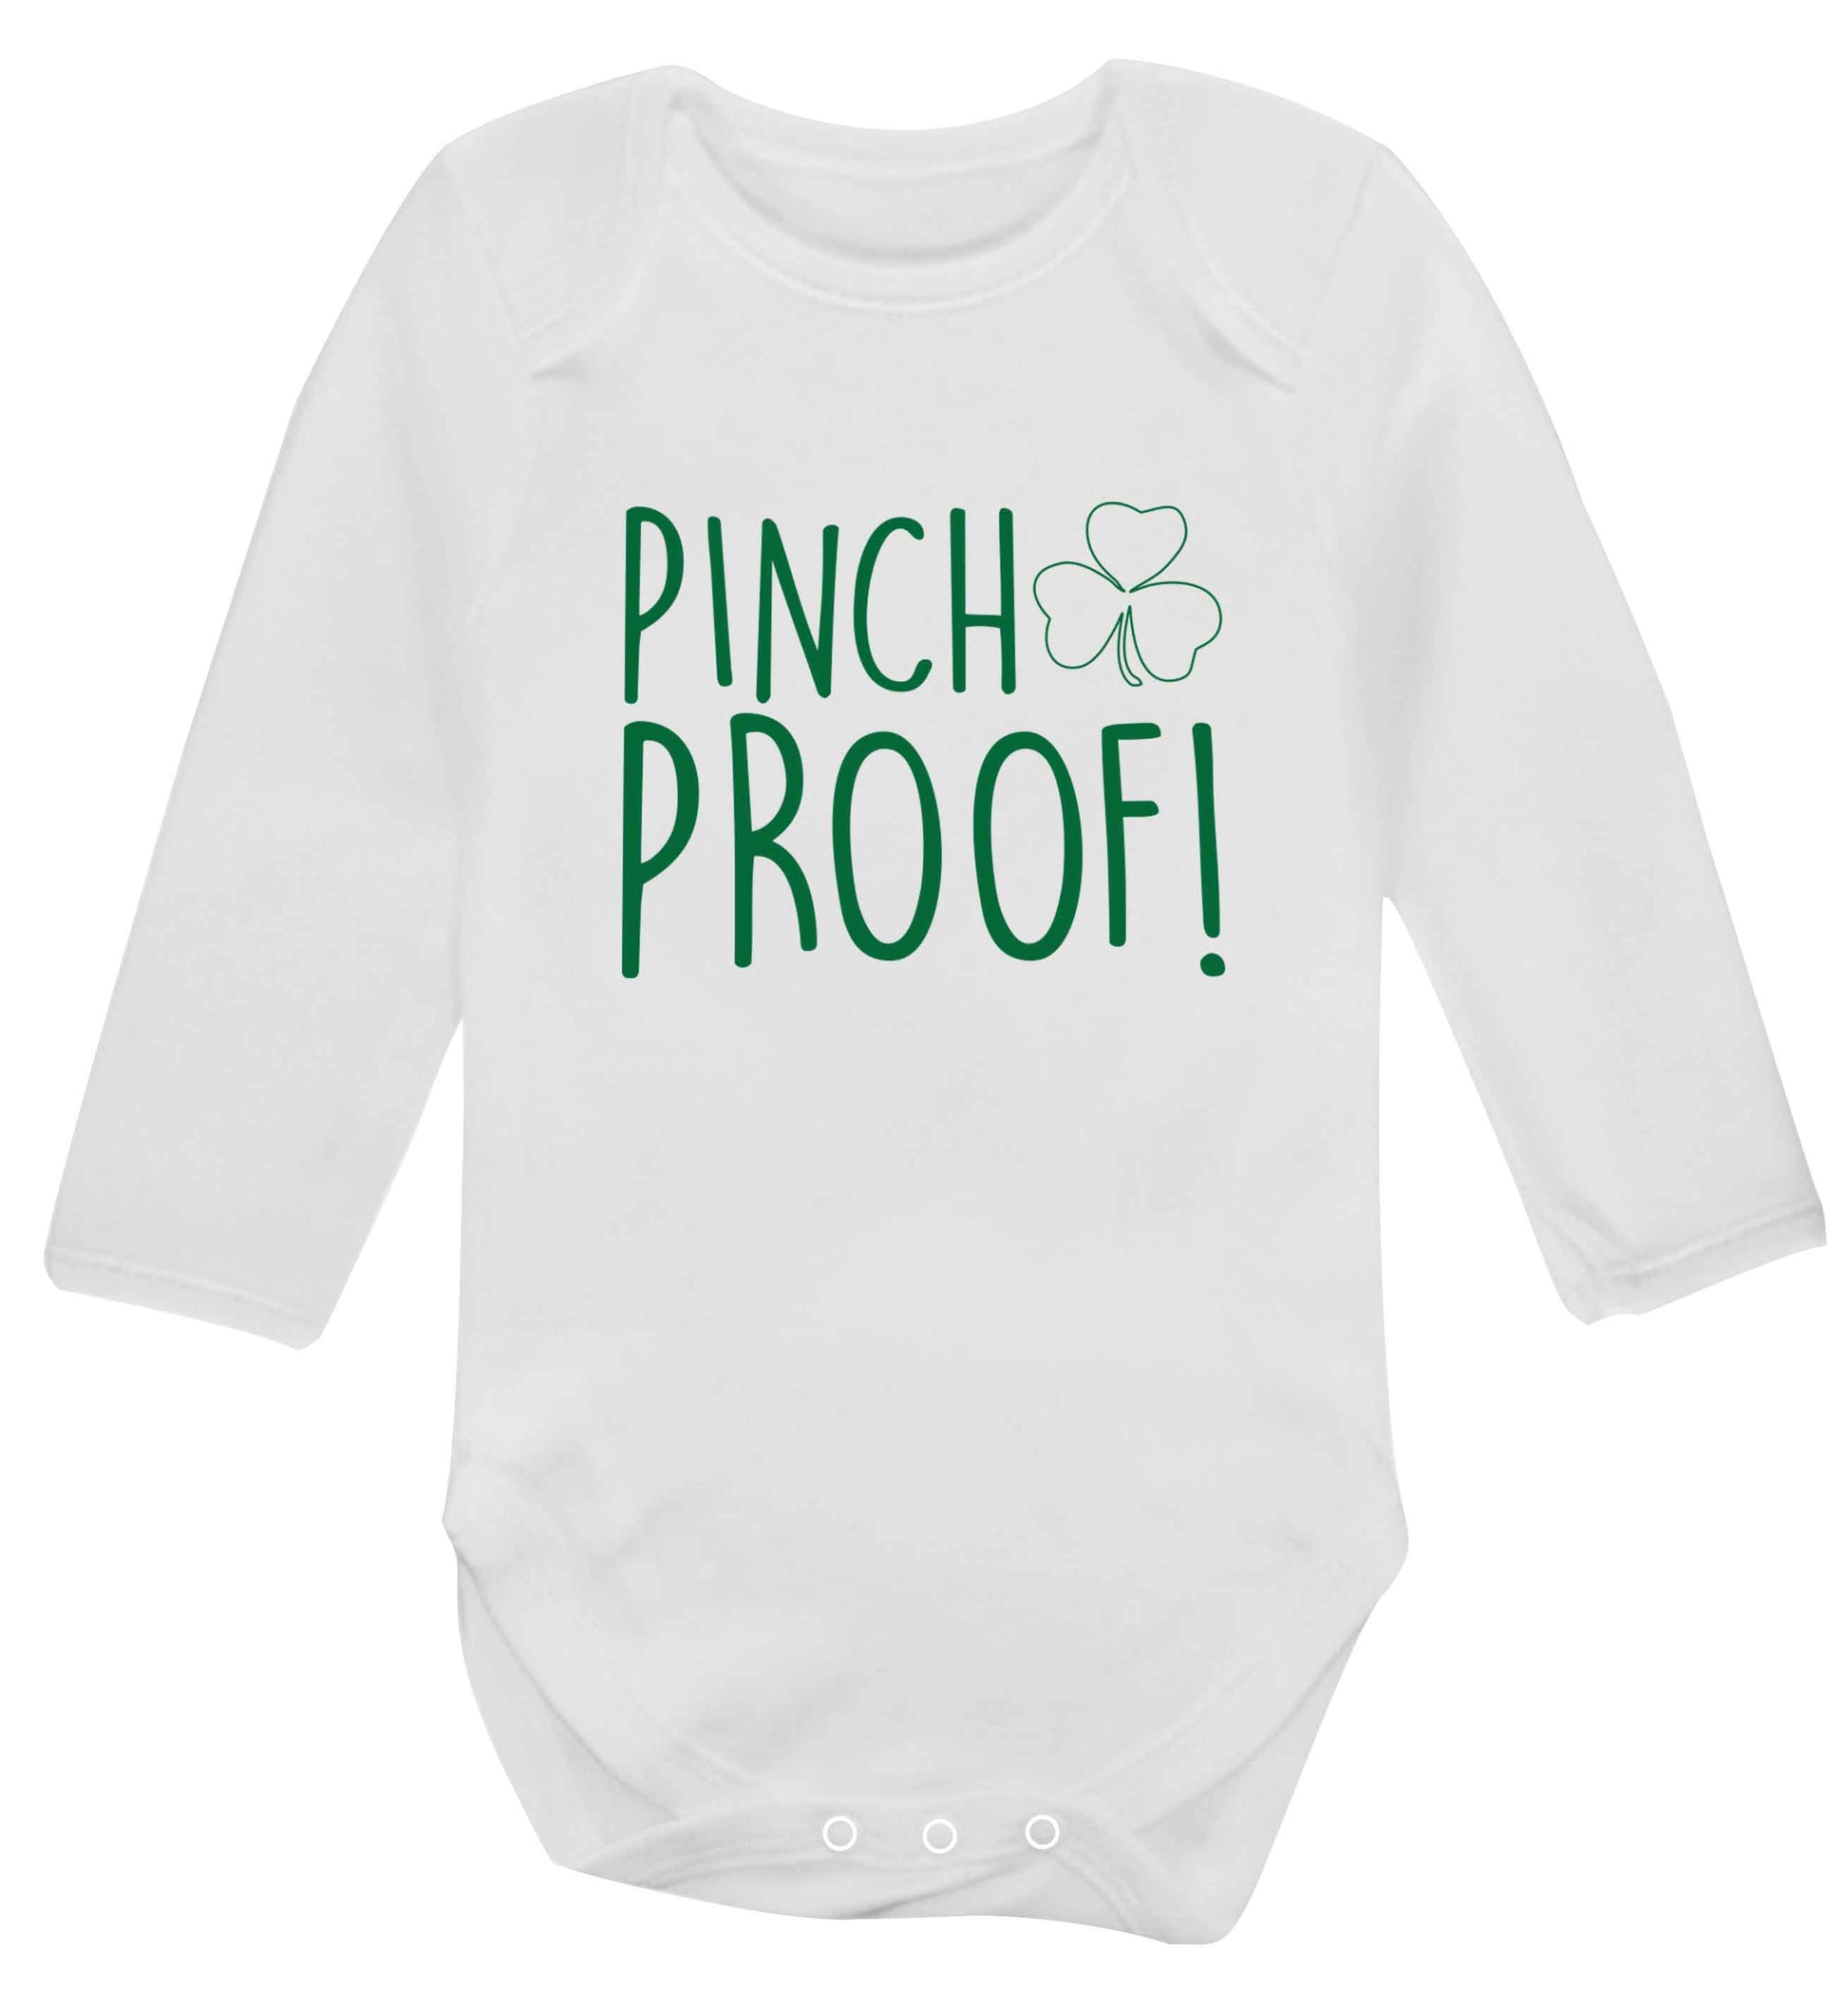 Pinch Proof baby vest long sleeved white 6-12 months